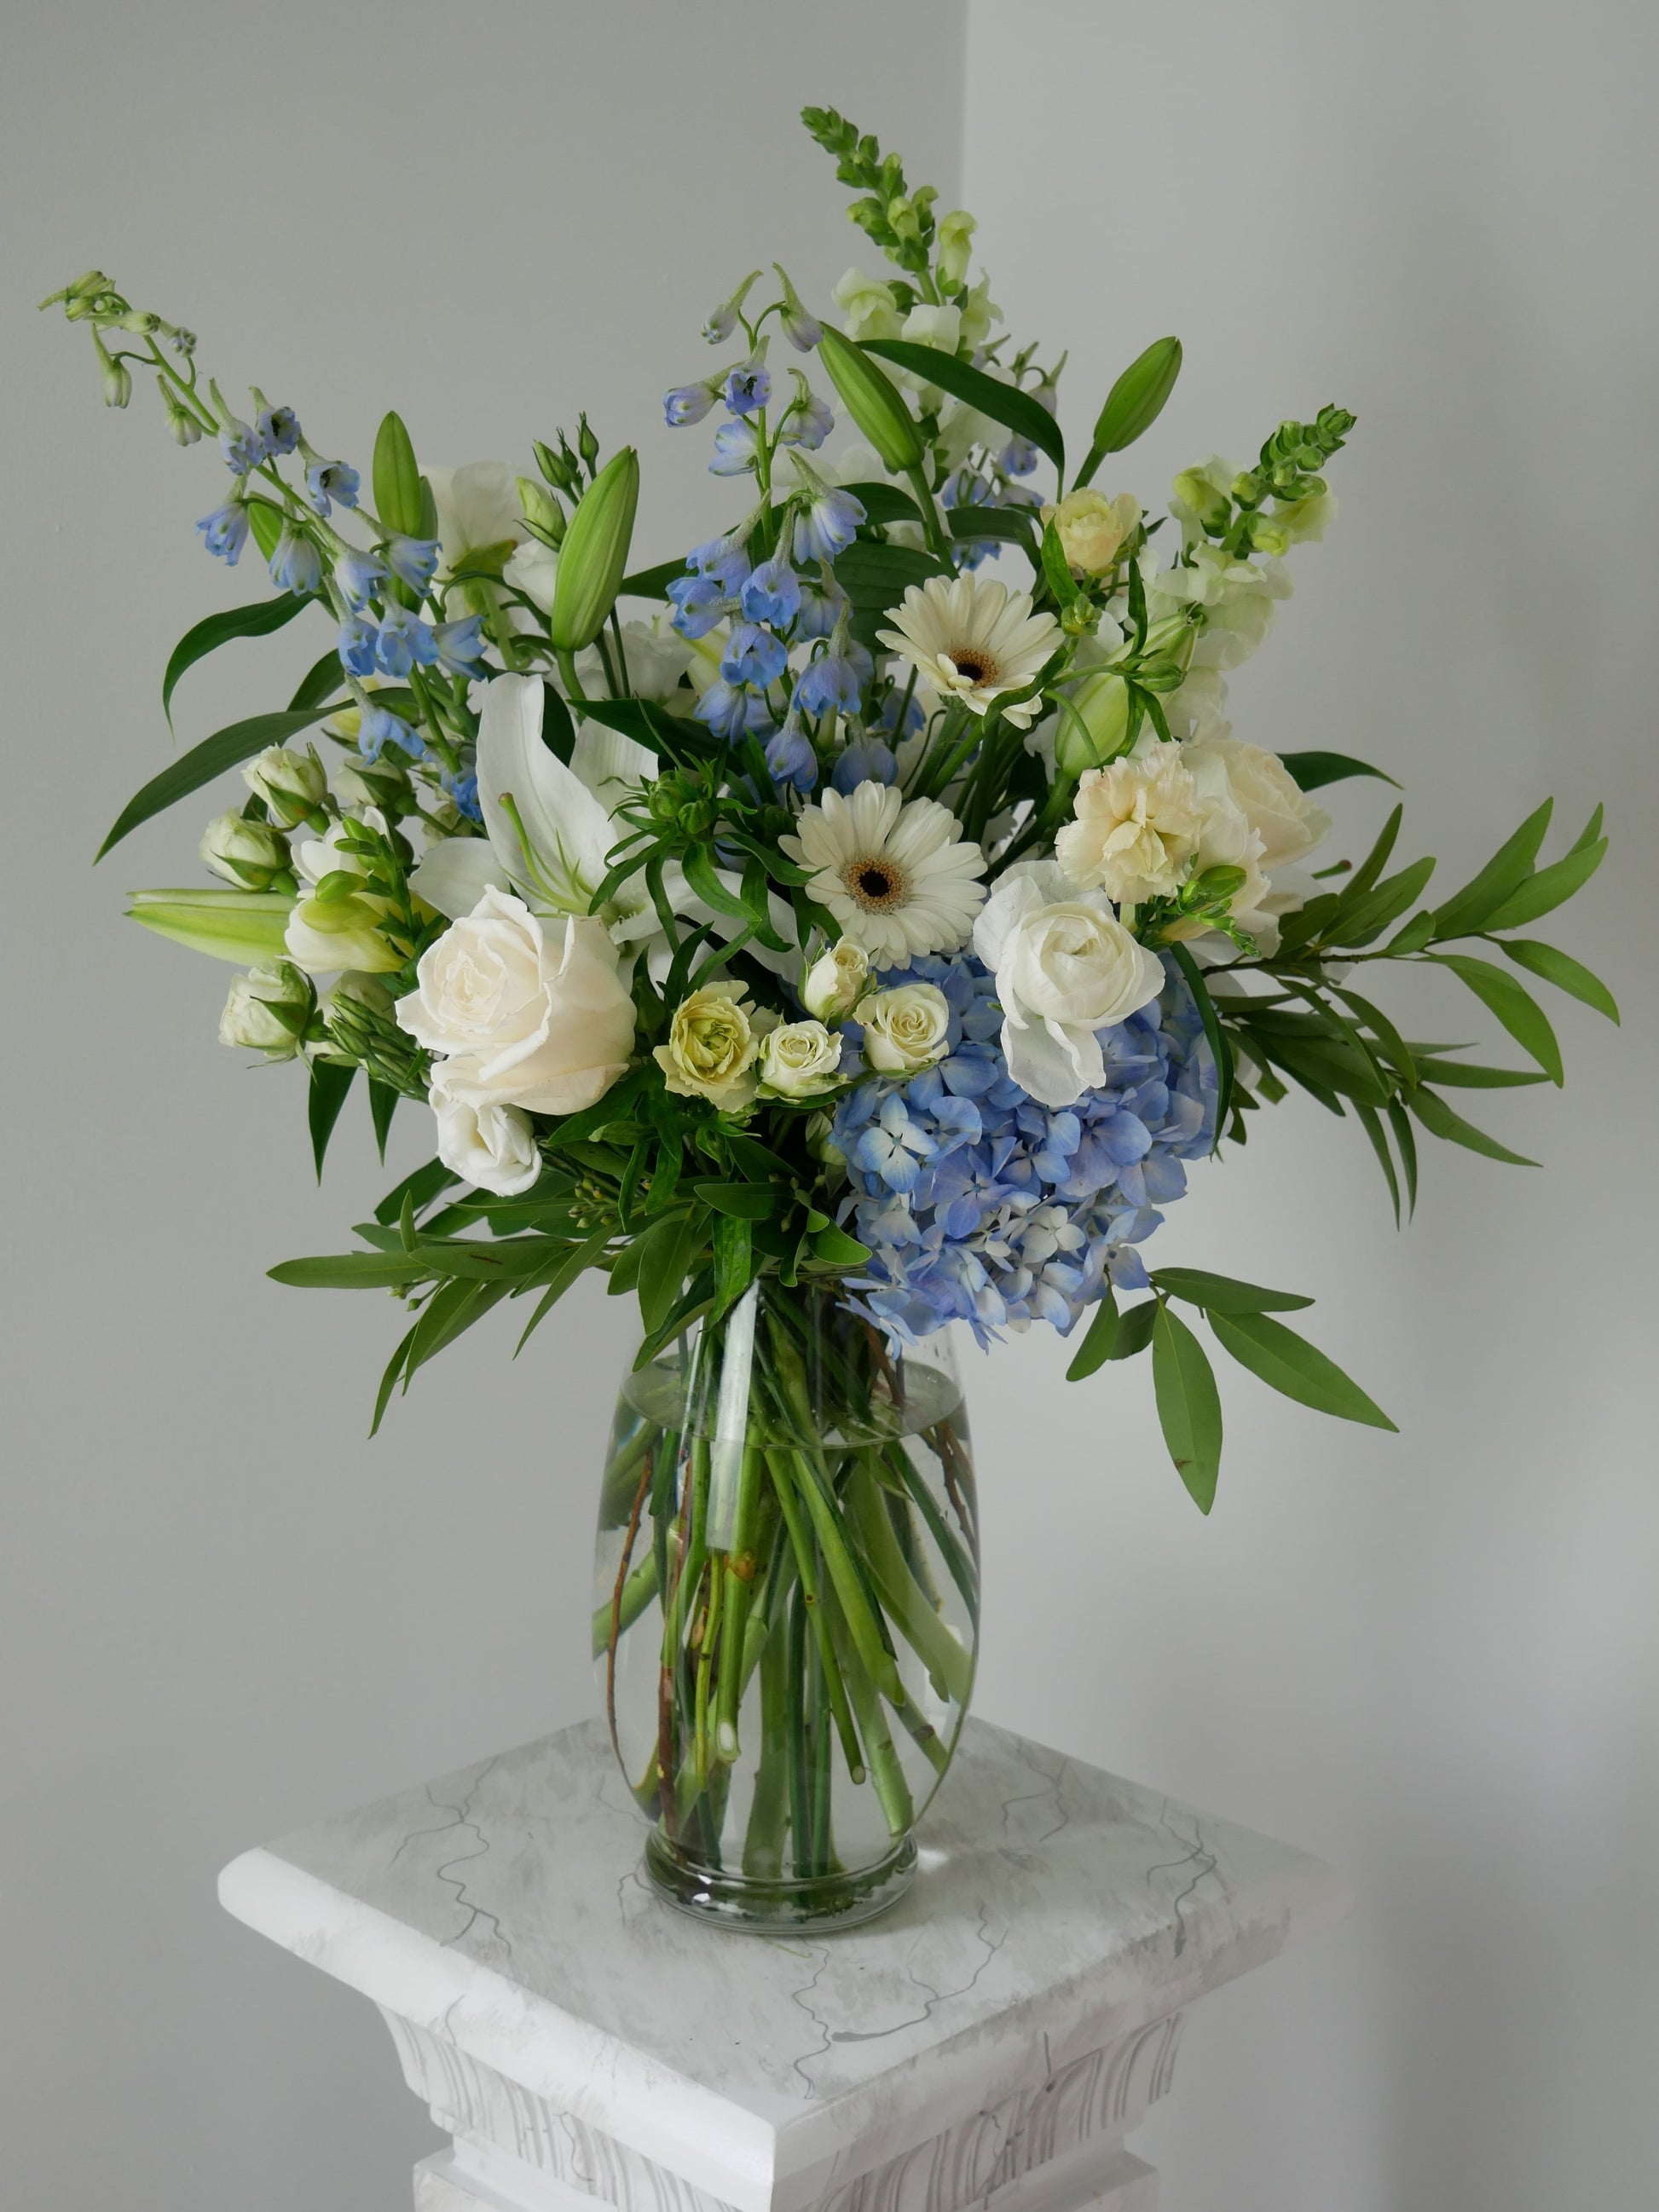 Different side of Tall pastel color flower arrangement in clear vase featuring hydrangeas, lilies, snap dragon, delphinium, ranunculus and more